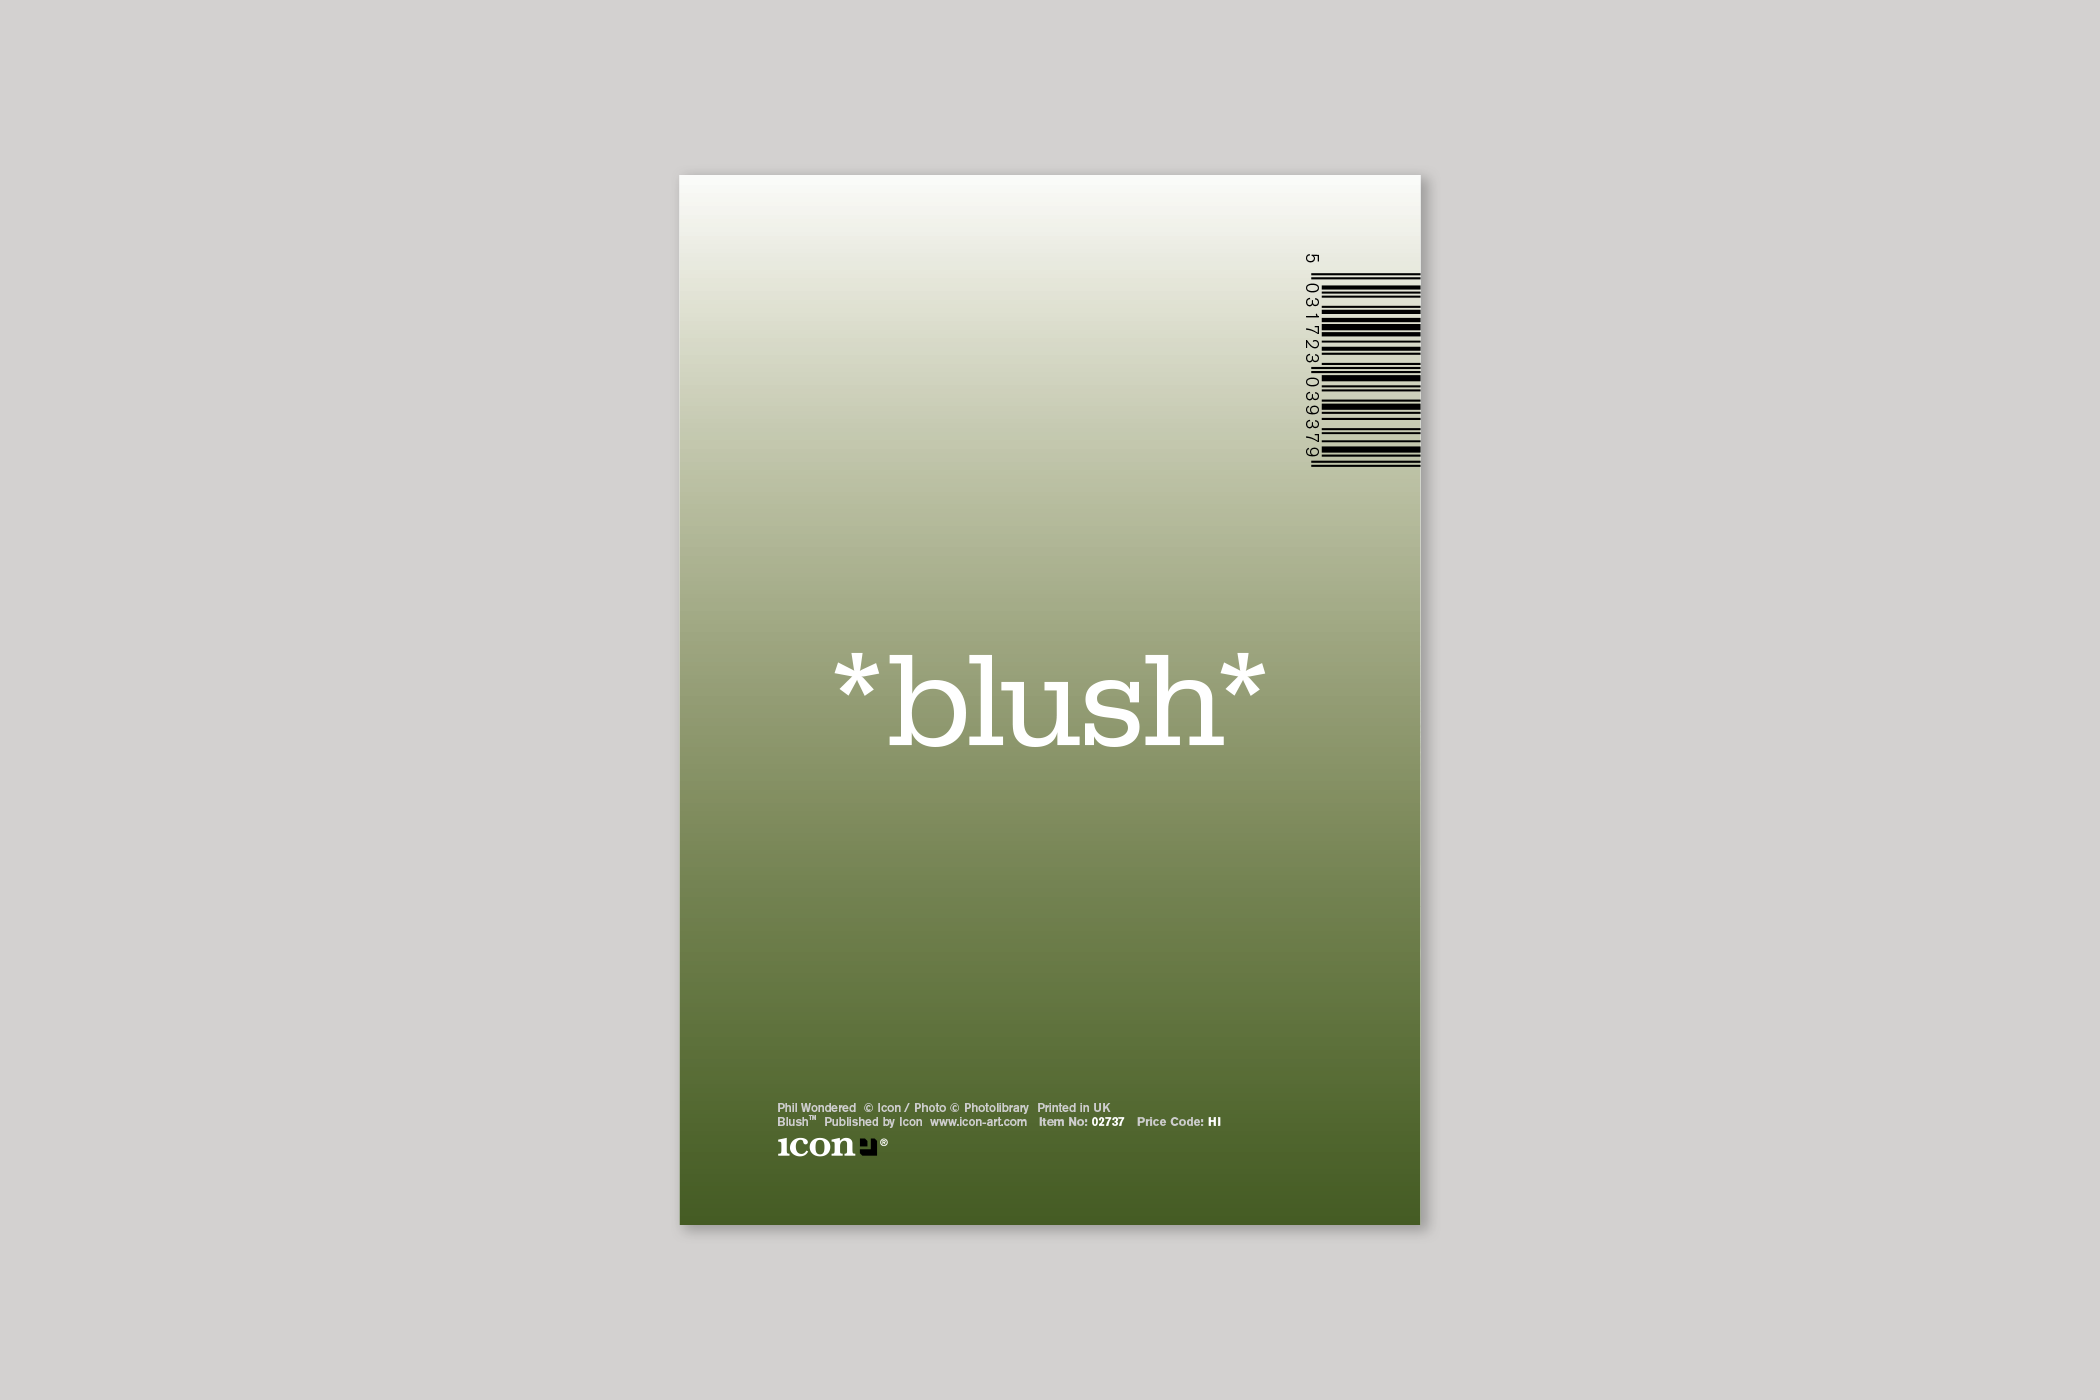 Phil Wondered from Blush humour range of greeting cards by Icon, with envelope.